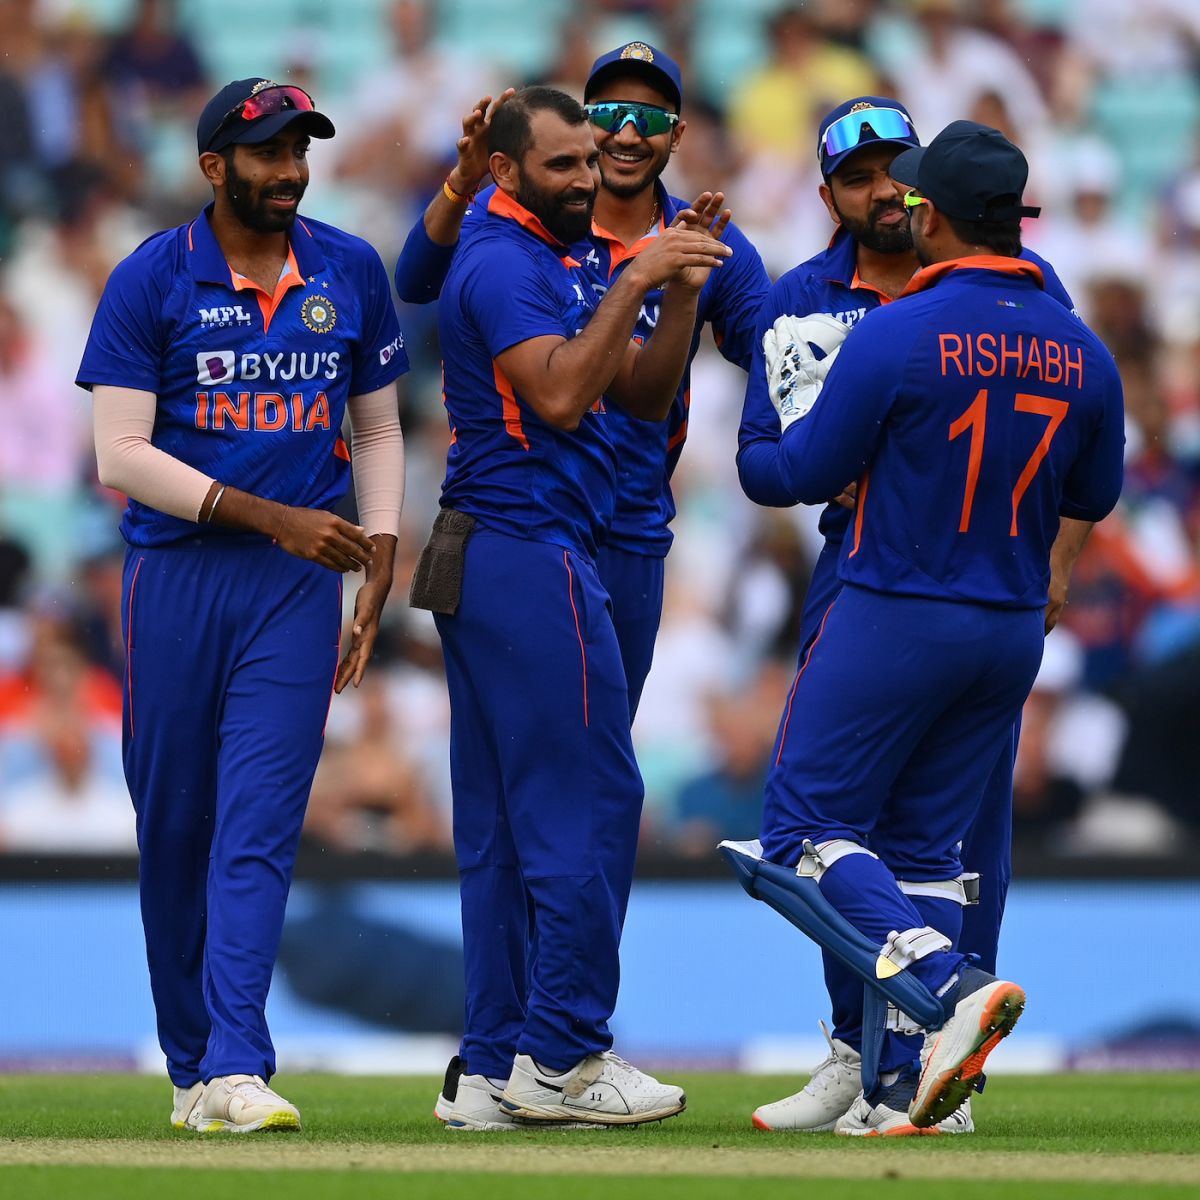 Mohammed Shami wasn't going to be completely overshadowed by Jasprit Bumrah, and struck a number of key blows, England vs India, 1st ODI, The Oval, London, July 12, 2022